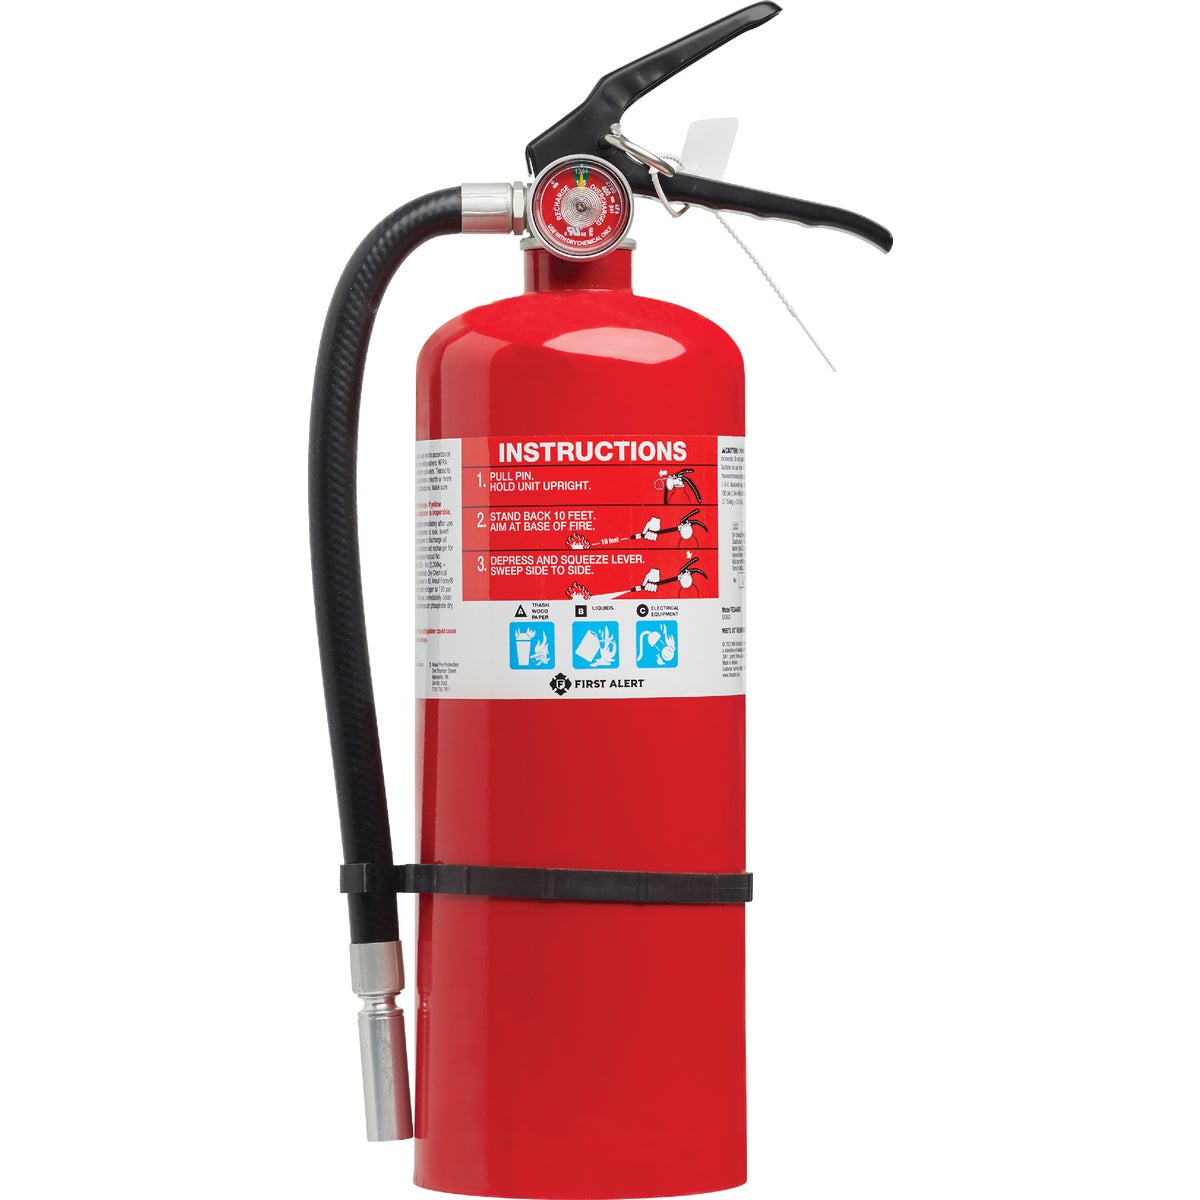 Item 322172, The 3-A:40-B:C Rechargeable Heavy-Duty Plus Fire Extinguisher fights paper